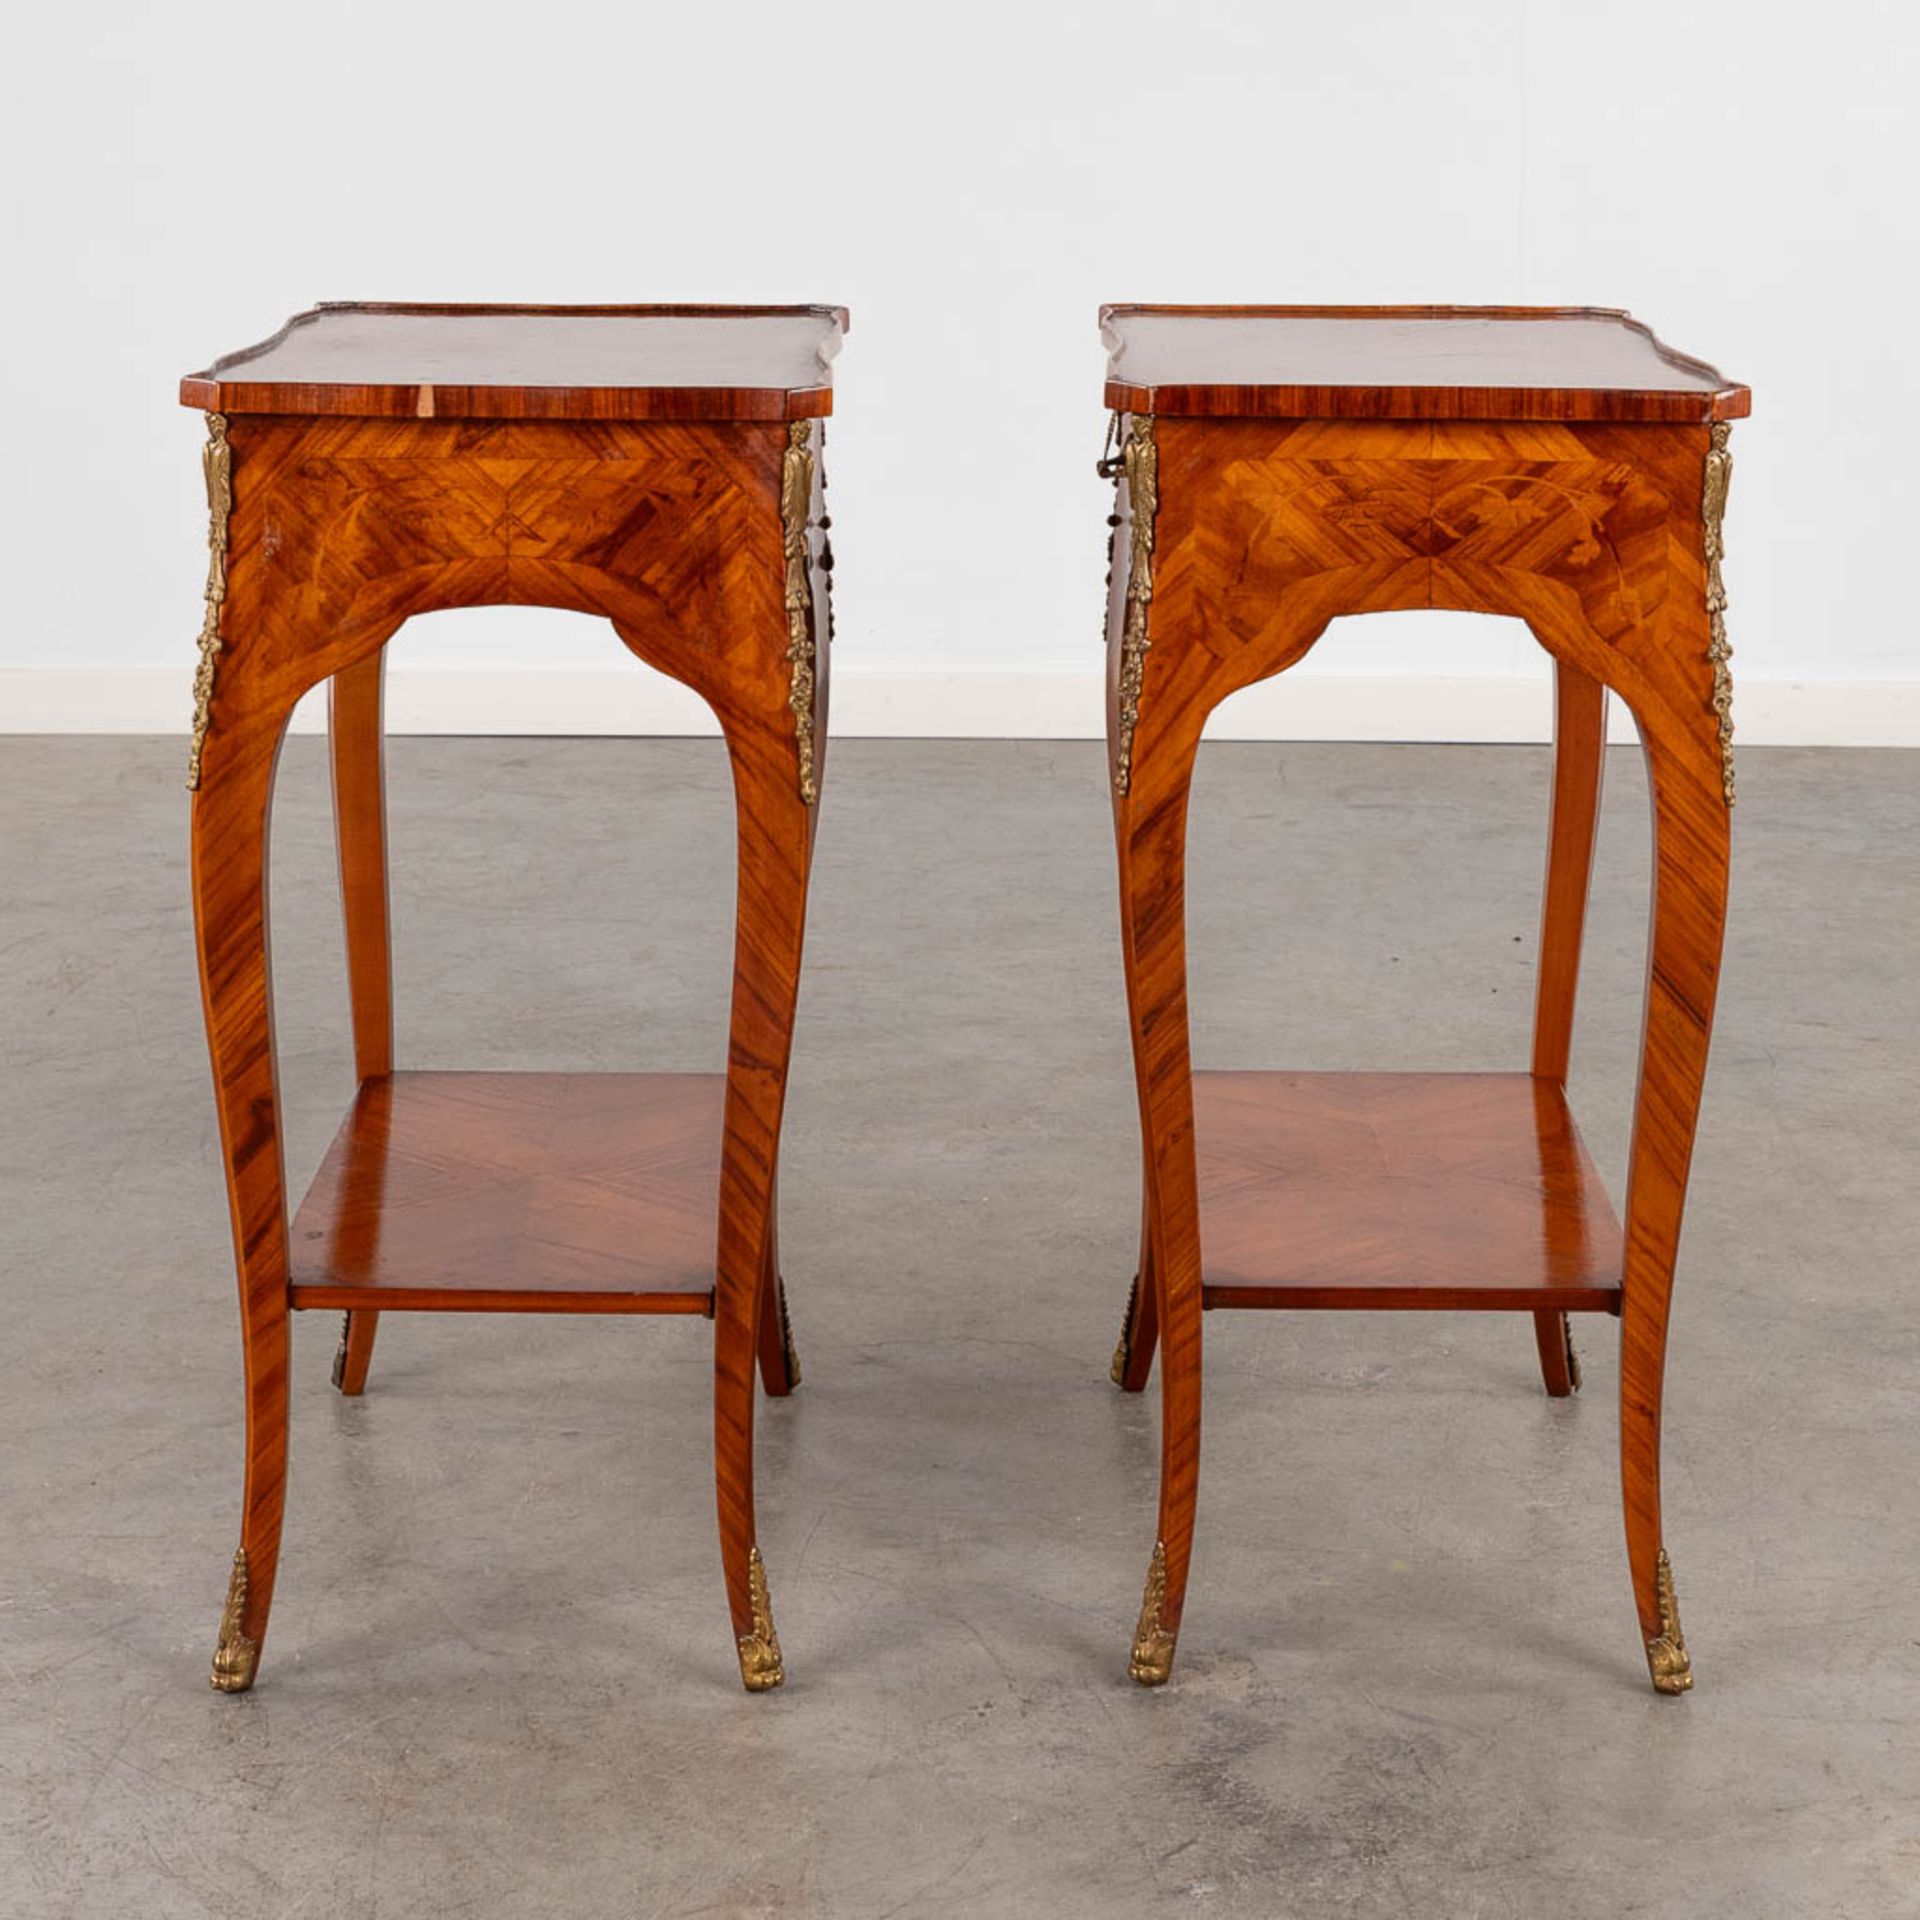 A pair of two-tier side tables with a drawer, wood with marquetry inlay. 20th C. (D:30 x W:45 x H:63 - Image 5 of 14